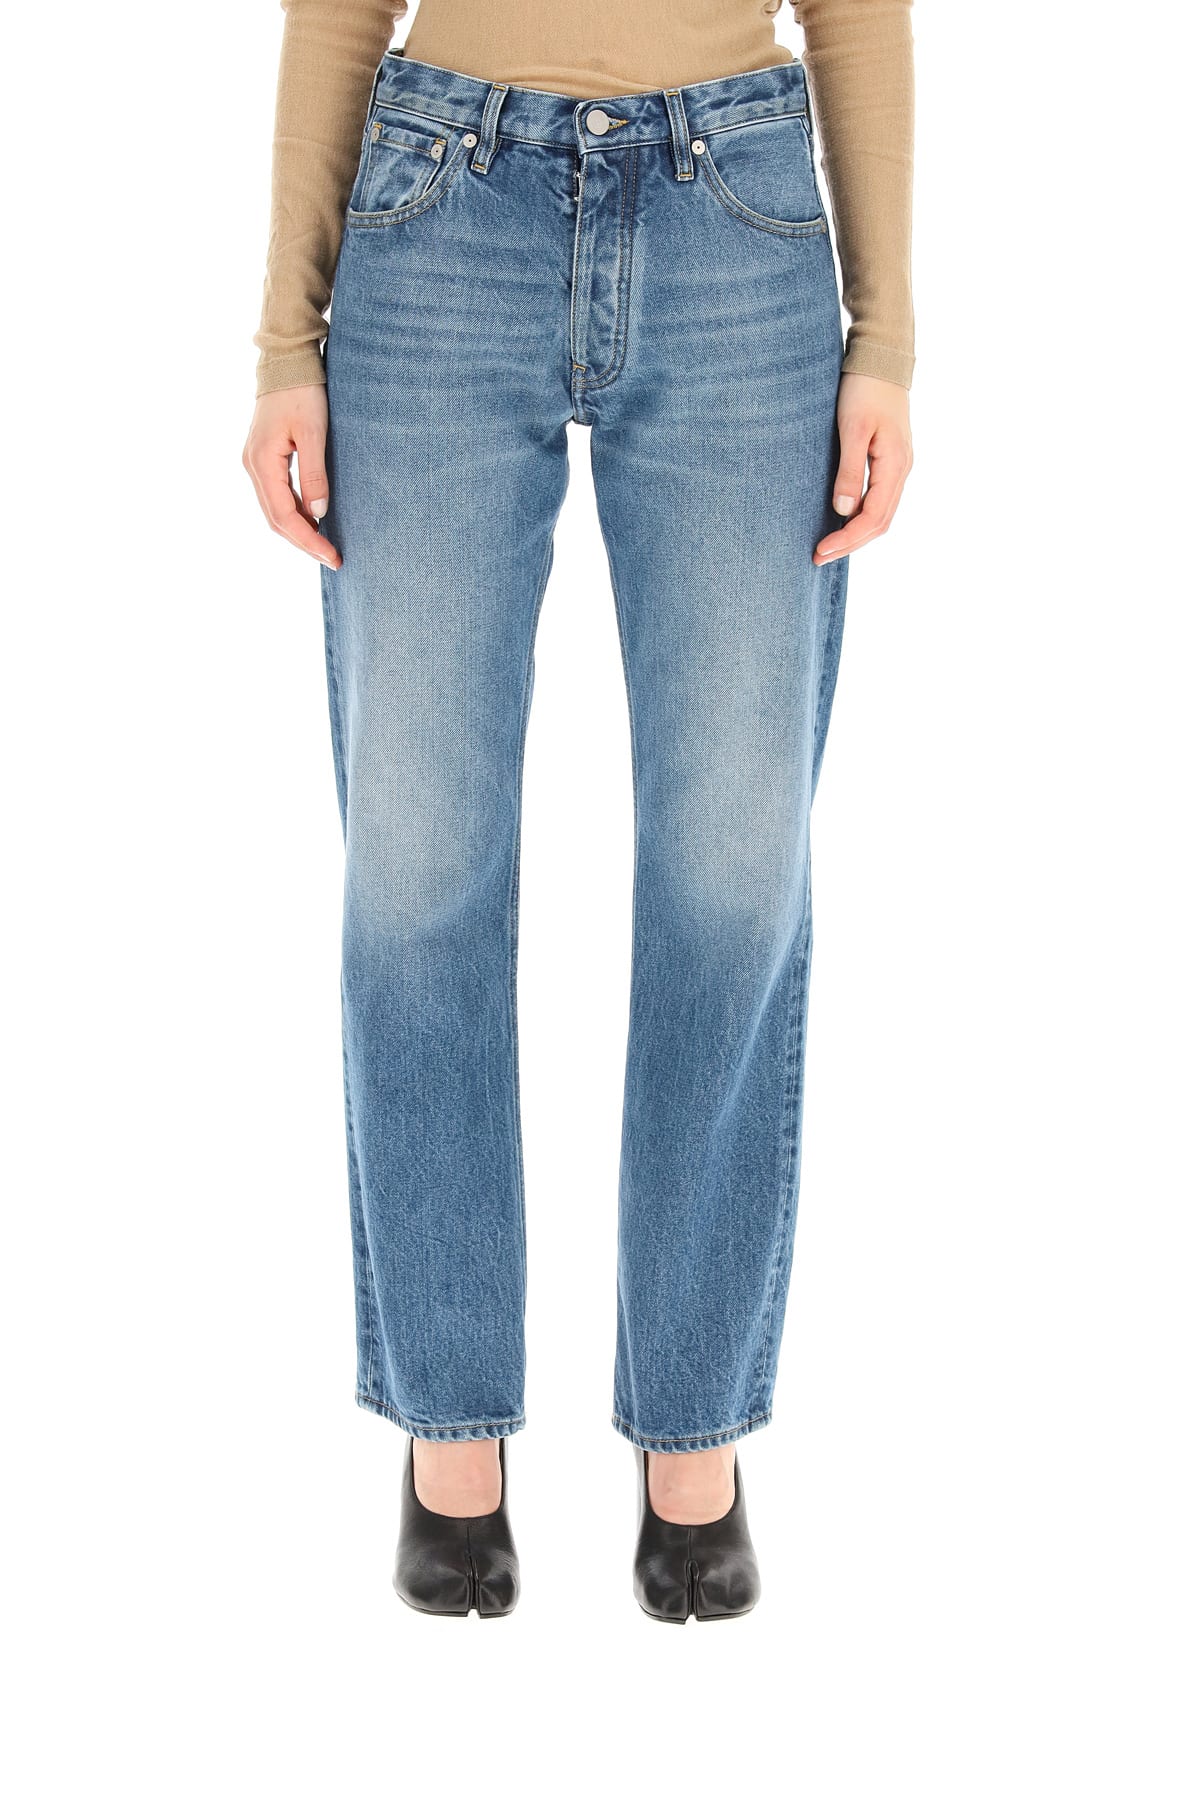 Maison Margiela Icons Jeans In Faded Denim